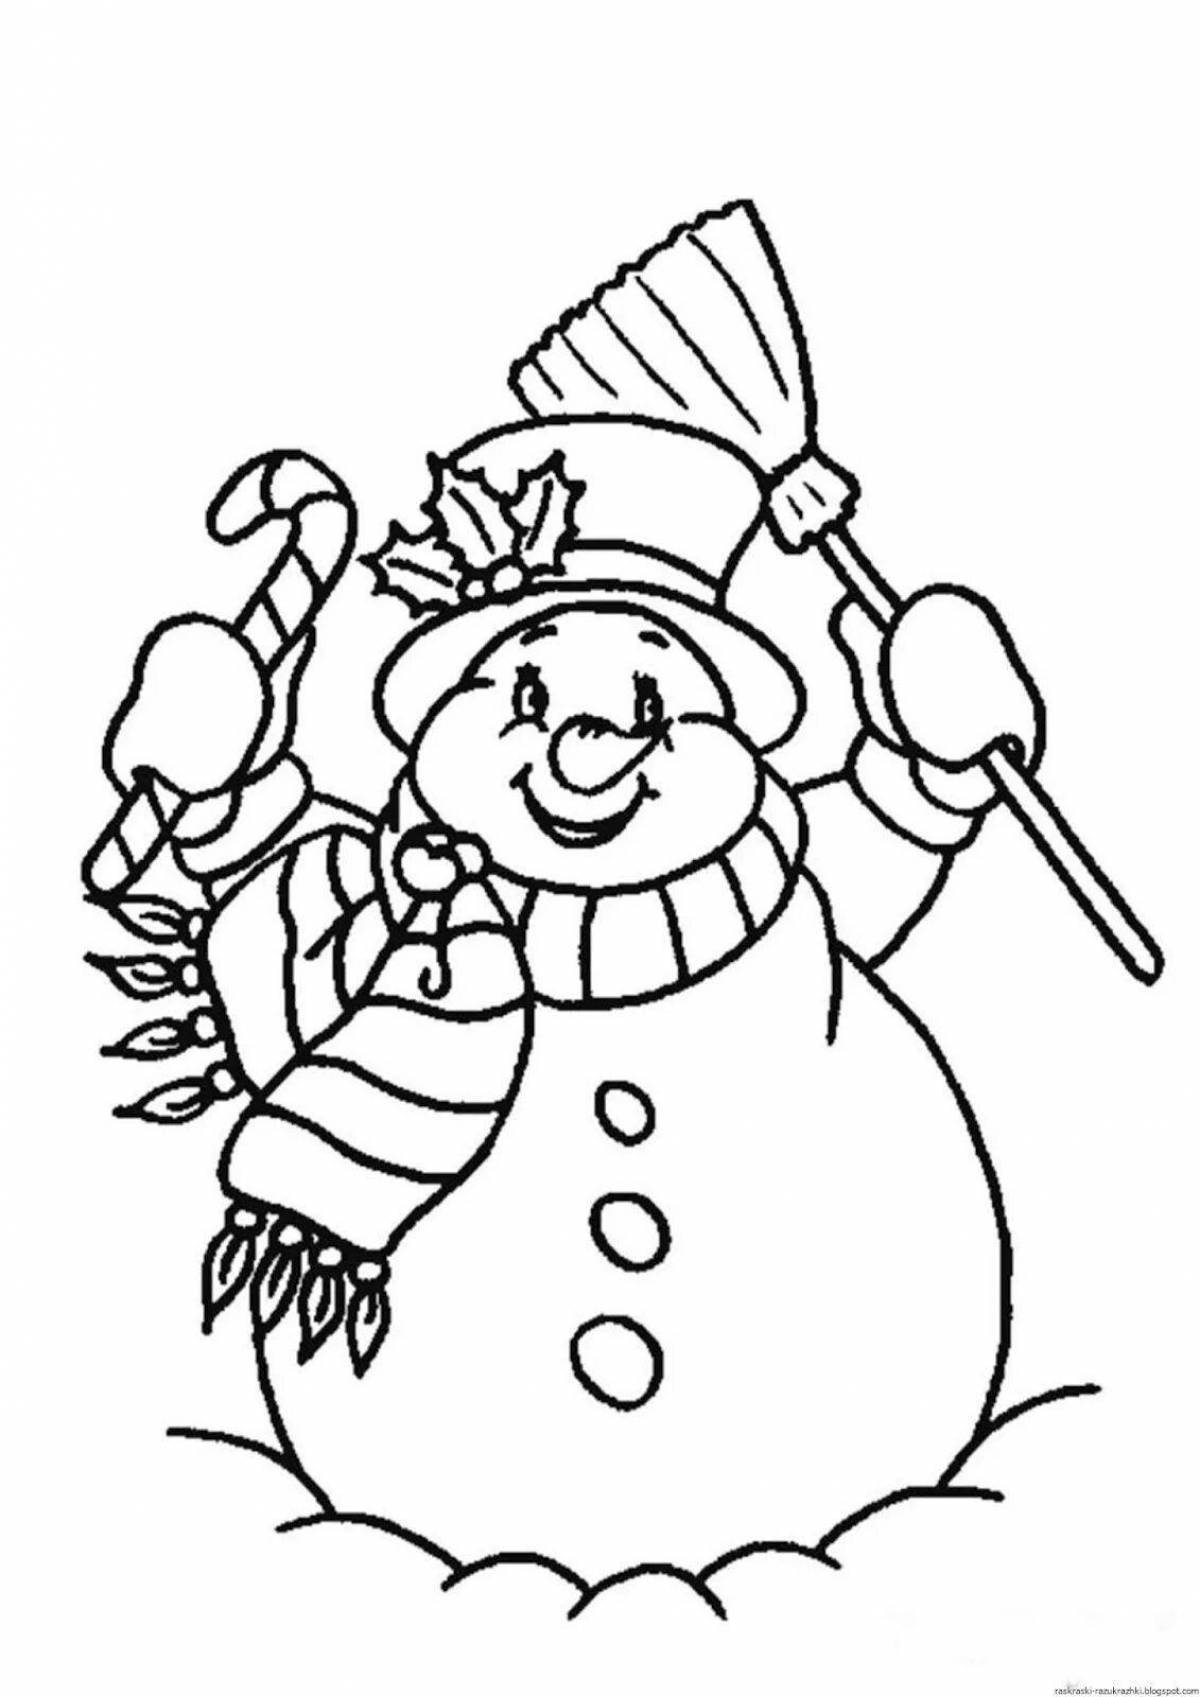 Adorable snowman drawing for kids